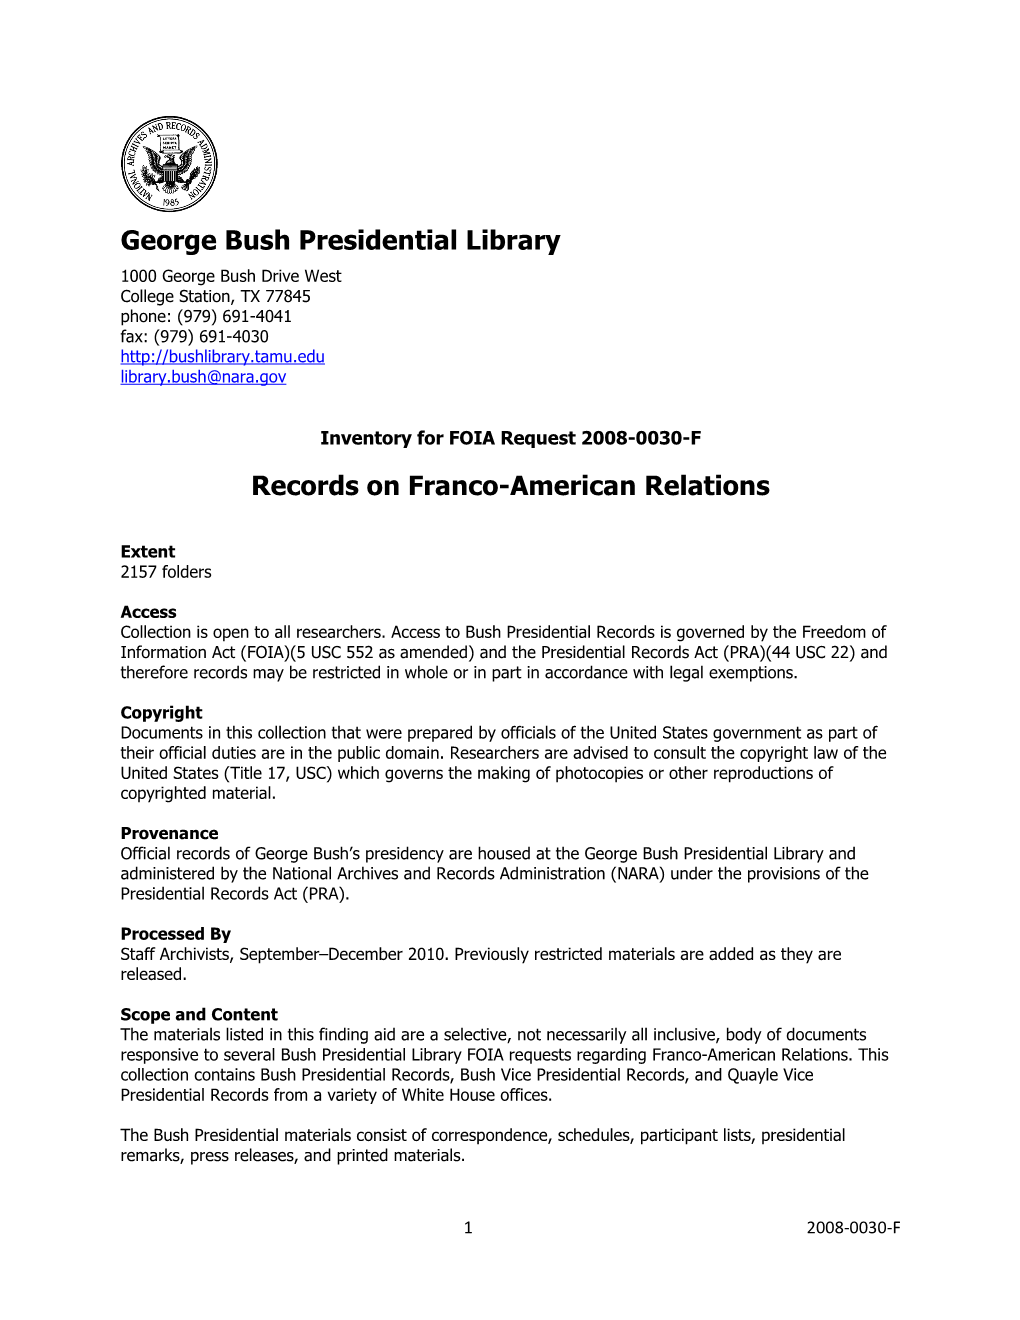 George Bush Presidential Library Records on Franco-American